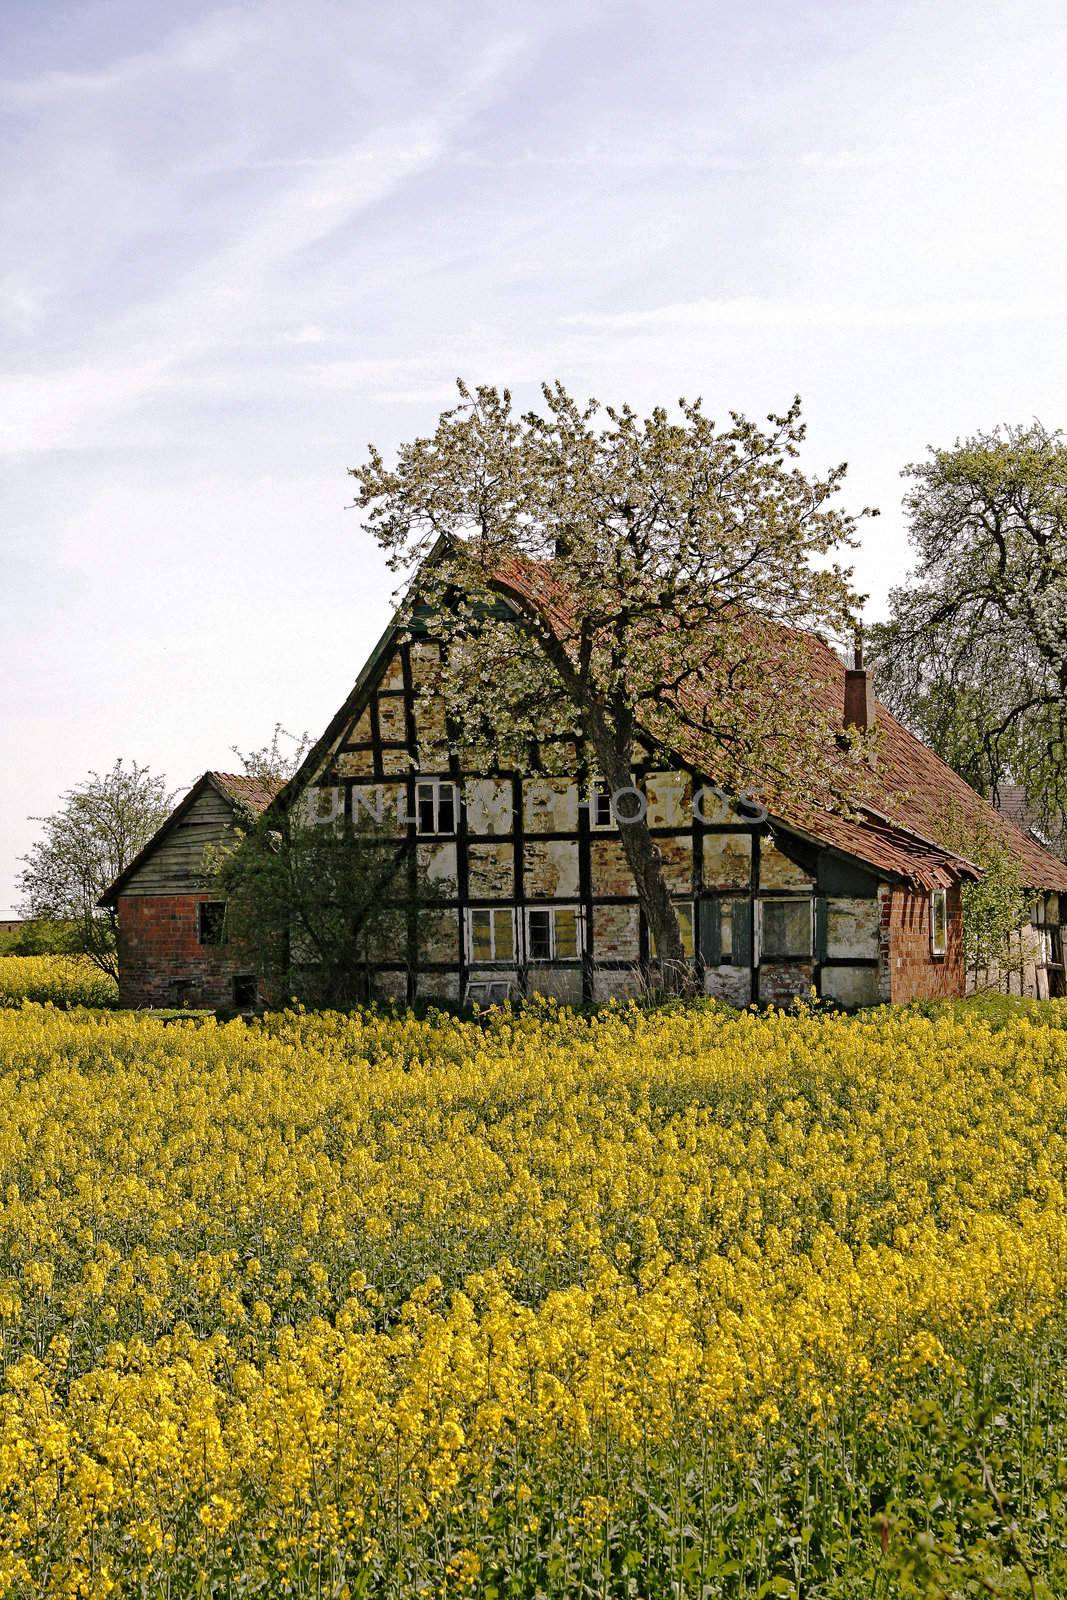 Old timbered house with rapeseed field, near Hilter, Osnabrücker Land, Germany. Hilter, Hof mit Rapsfeld.